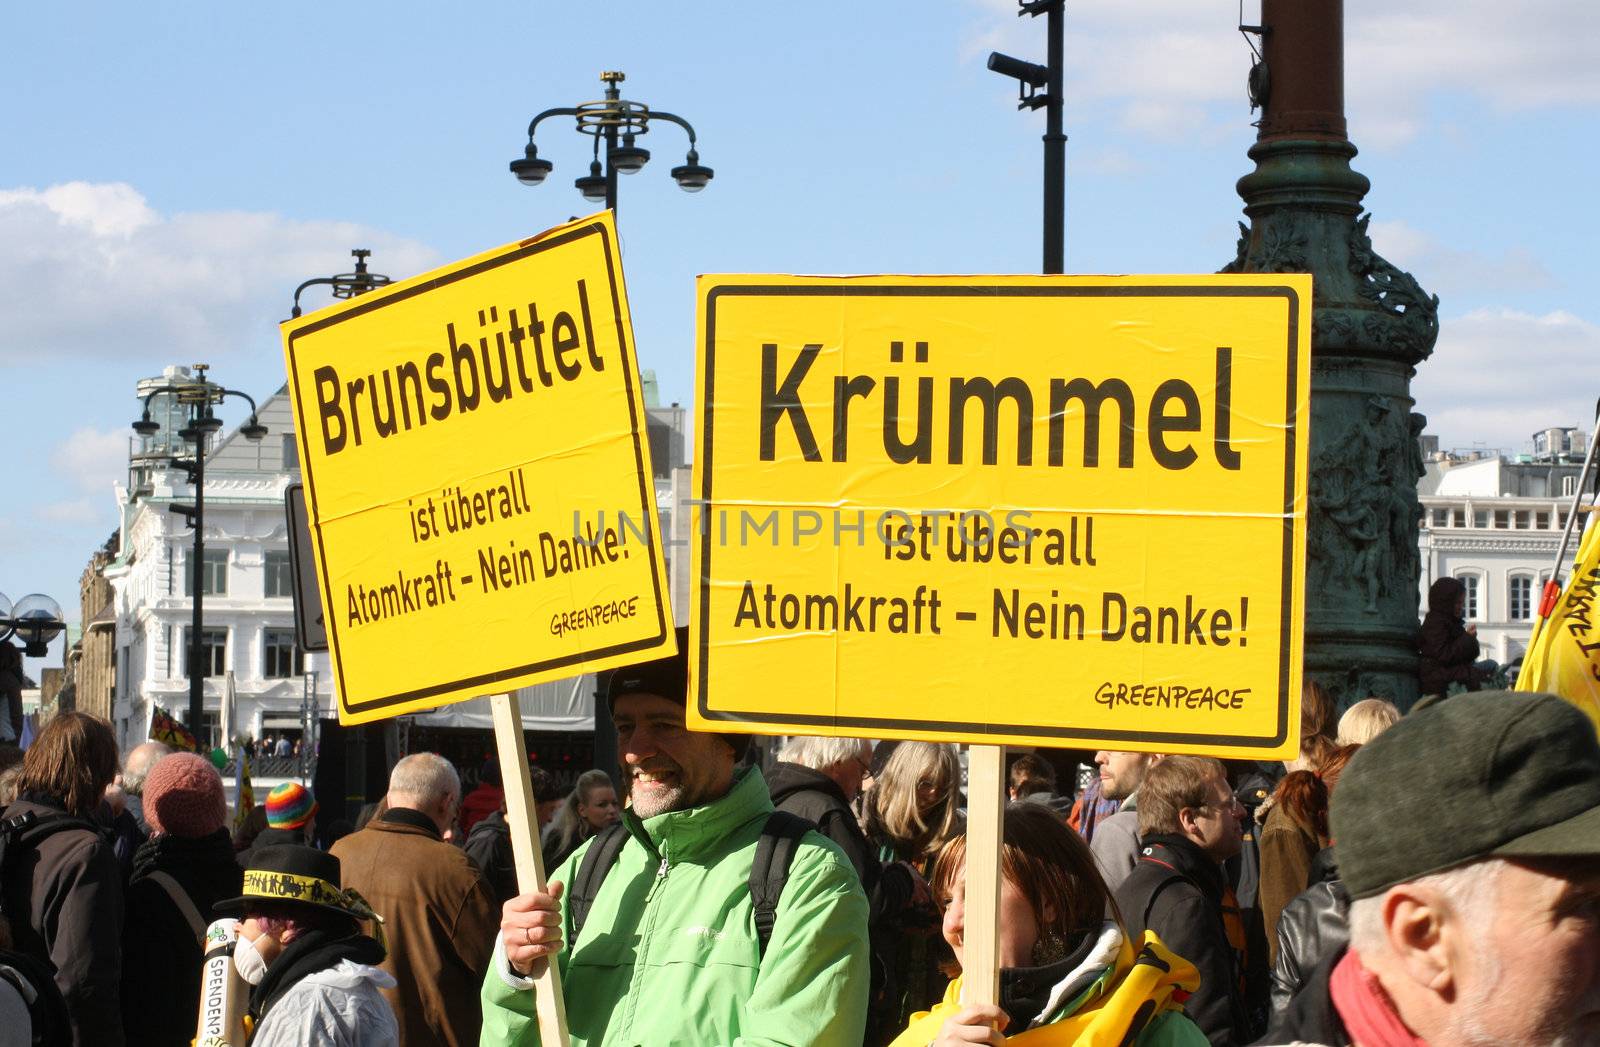 Huge protest against nuclear energy. On that day 250.000 participants in four major German cities, here: 50.000 in Hamburg. After a march through the city center the protesters gathered on the Rathausmarkt. These banners are by Greenpeace: "Brunsbüttel" and "Krümmel" are two nuclear power stations near Hamburg, the banners saying: "Brunsbüttel/Krümmel is everywhere. Nuclear power - no thank you!"
Photo taken on: March 26th, 2011.